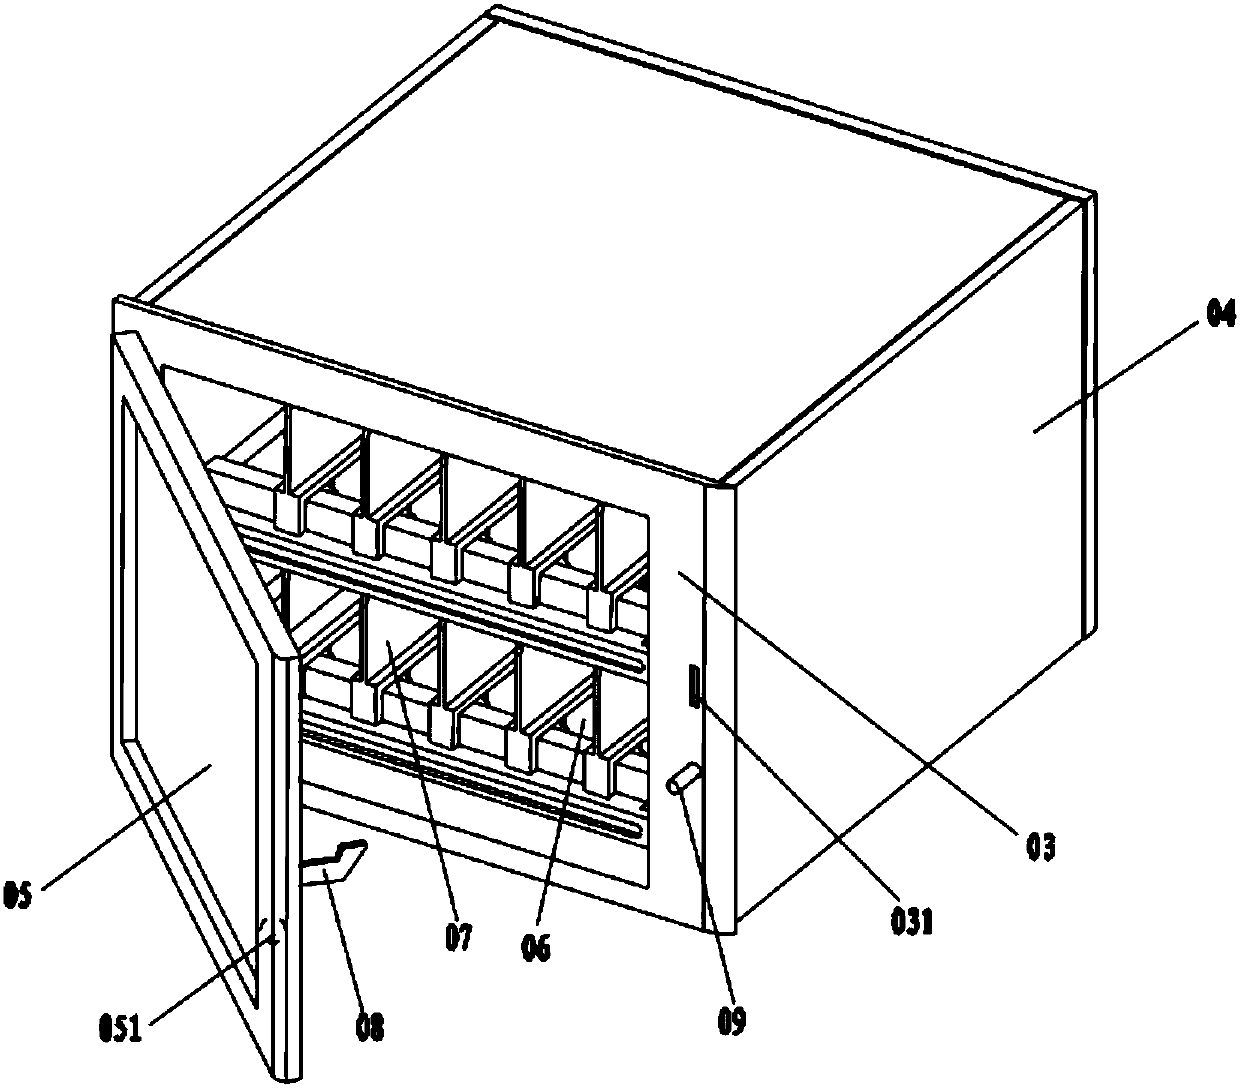 Tray structure of a medical fresh-keeping cabinet